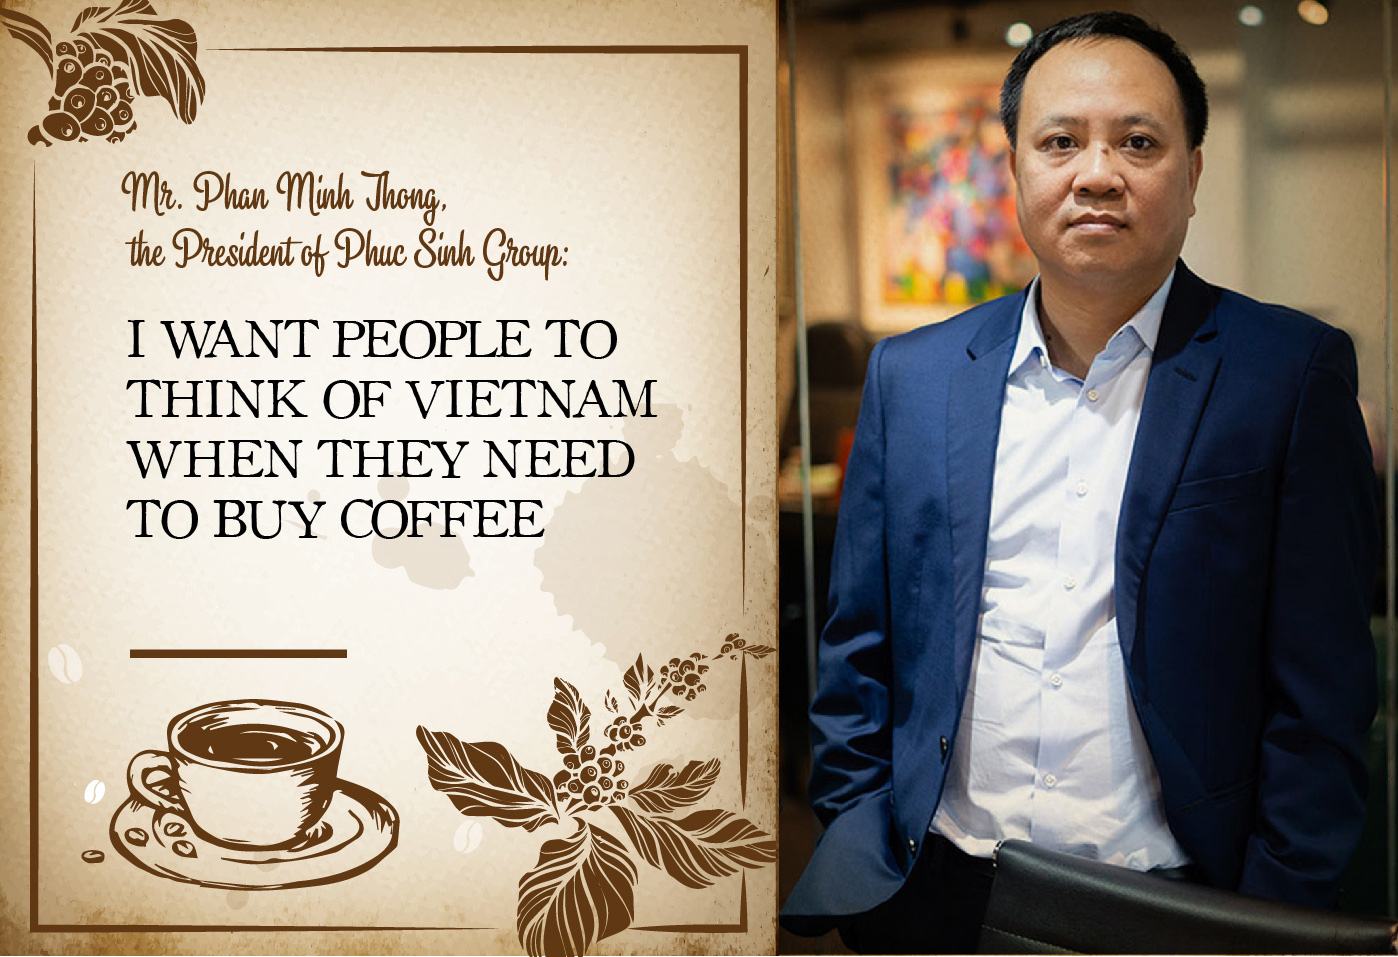 MR. PHAN MINH THONG, THE PRESIDENT OF PHUC SINH GROUP: I WANT PEOPLE TO THINK OF VIETNAM WHEN THEY NEED TO BUY COFFEE